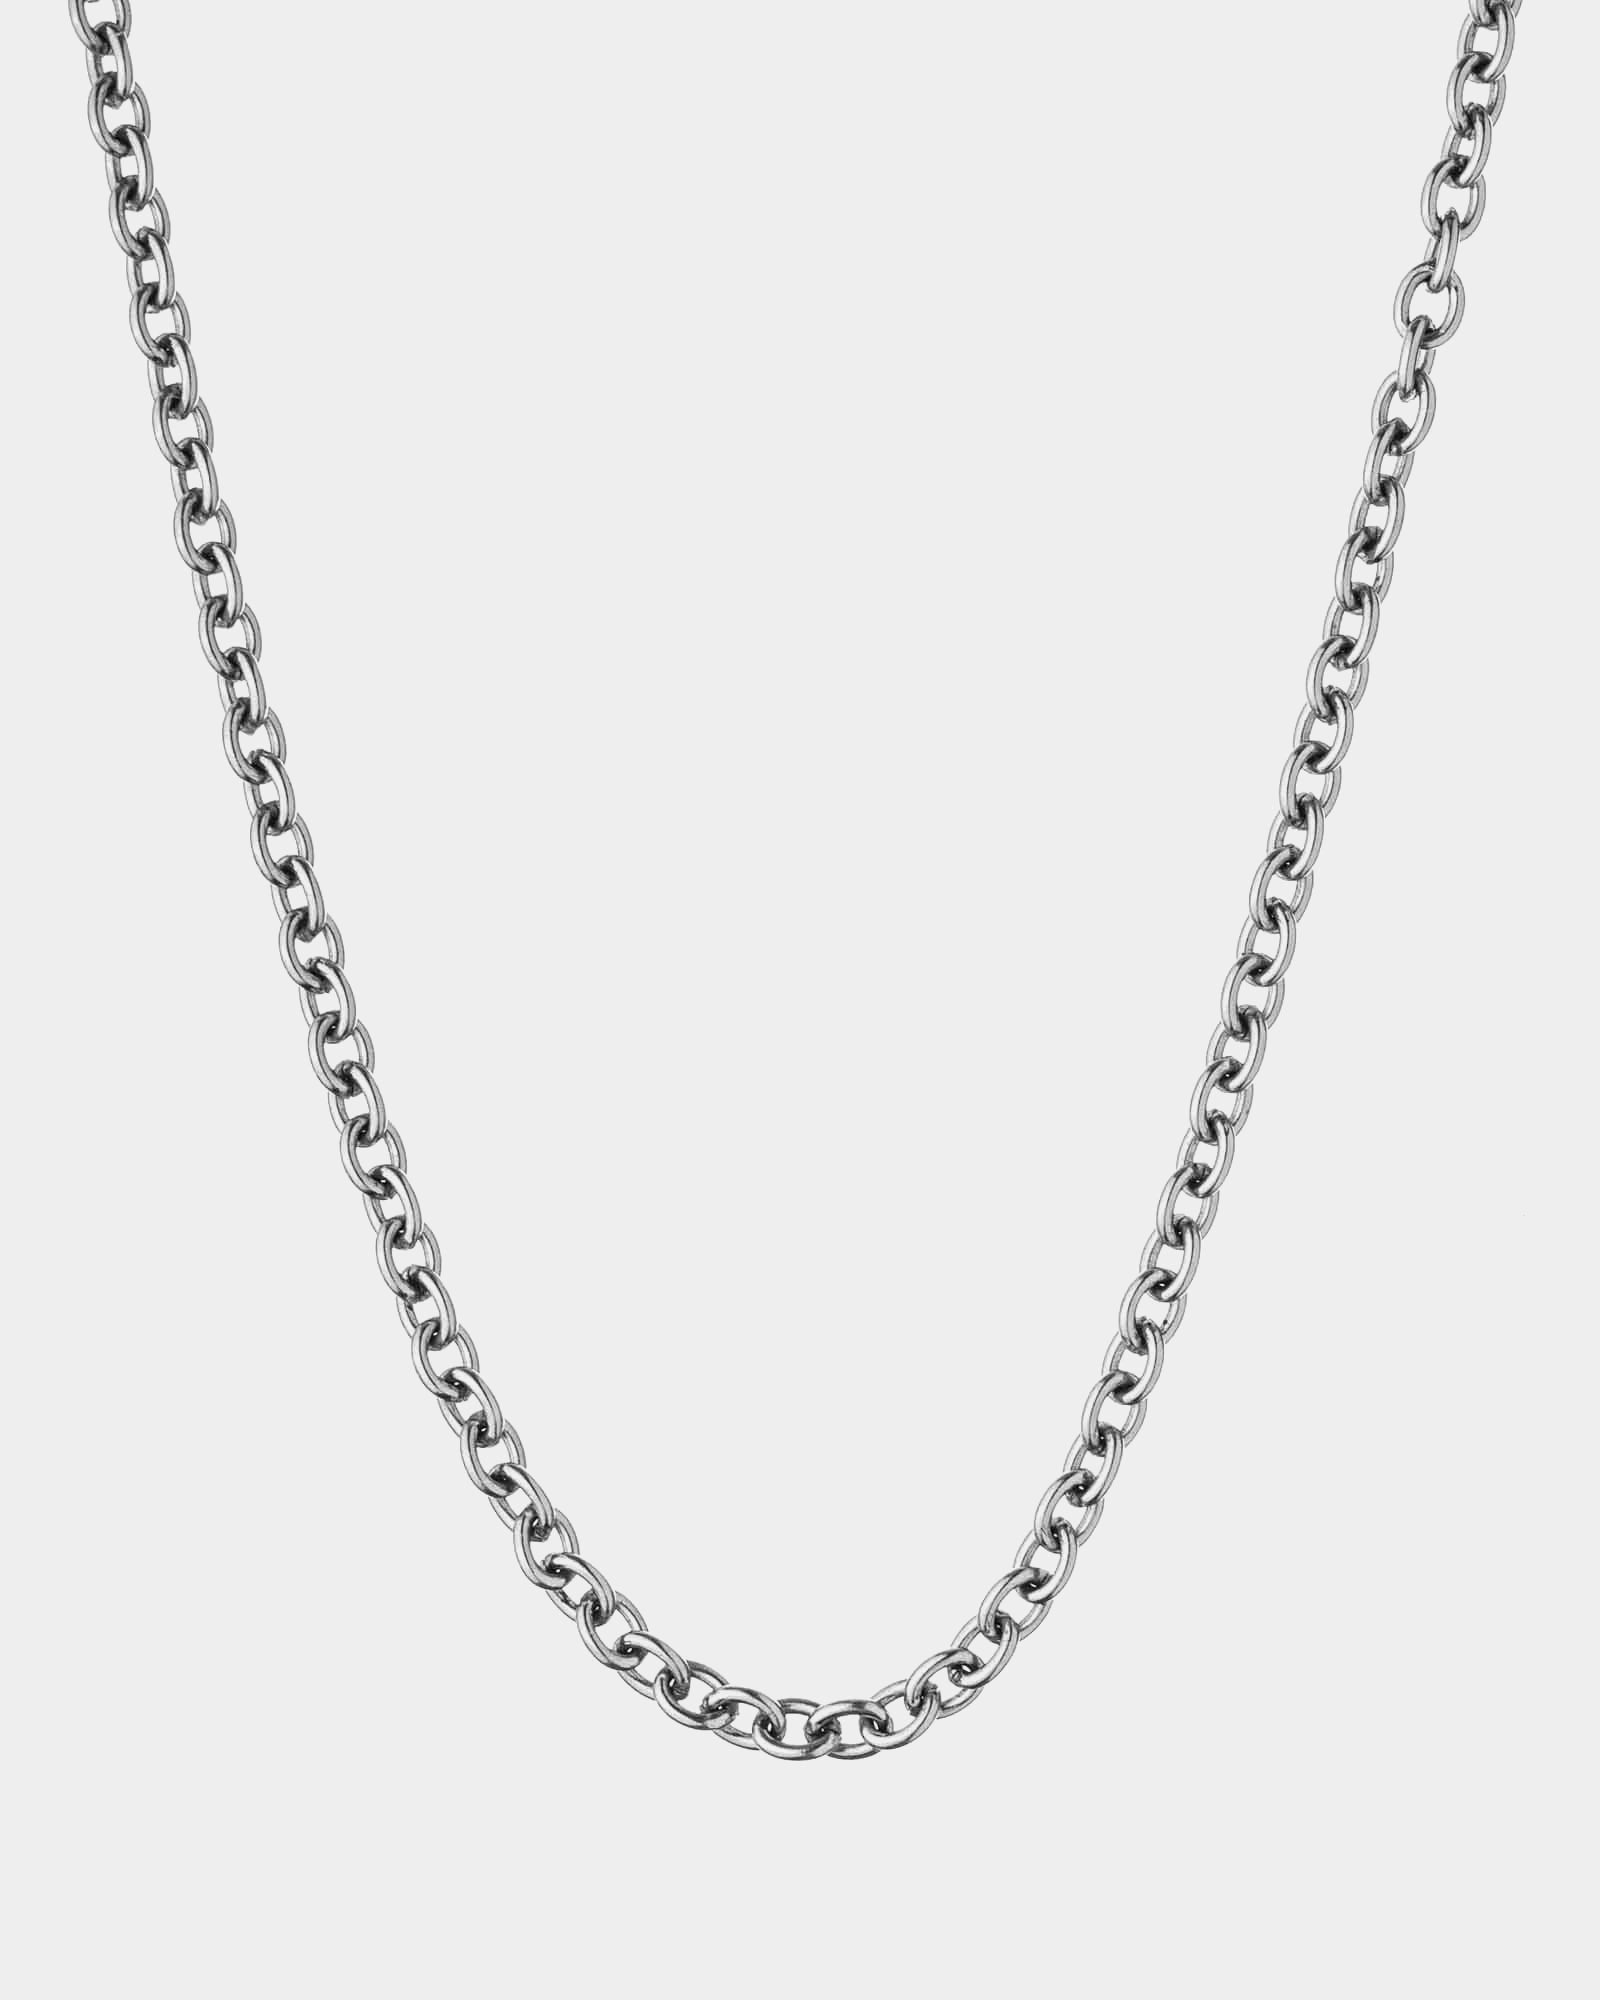 South - Stainless Steel Necklace 'South'- Online Unisex Accessory - Dicci